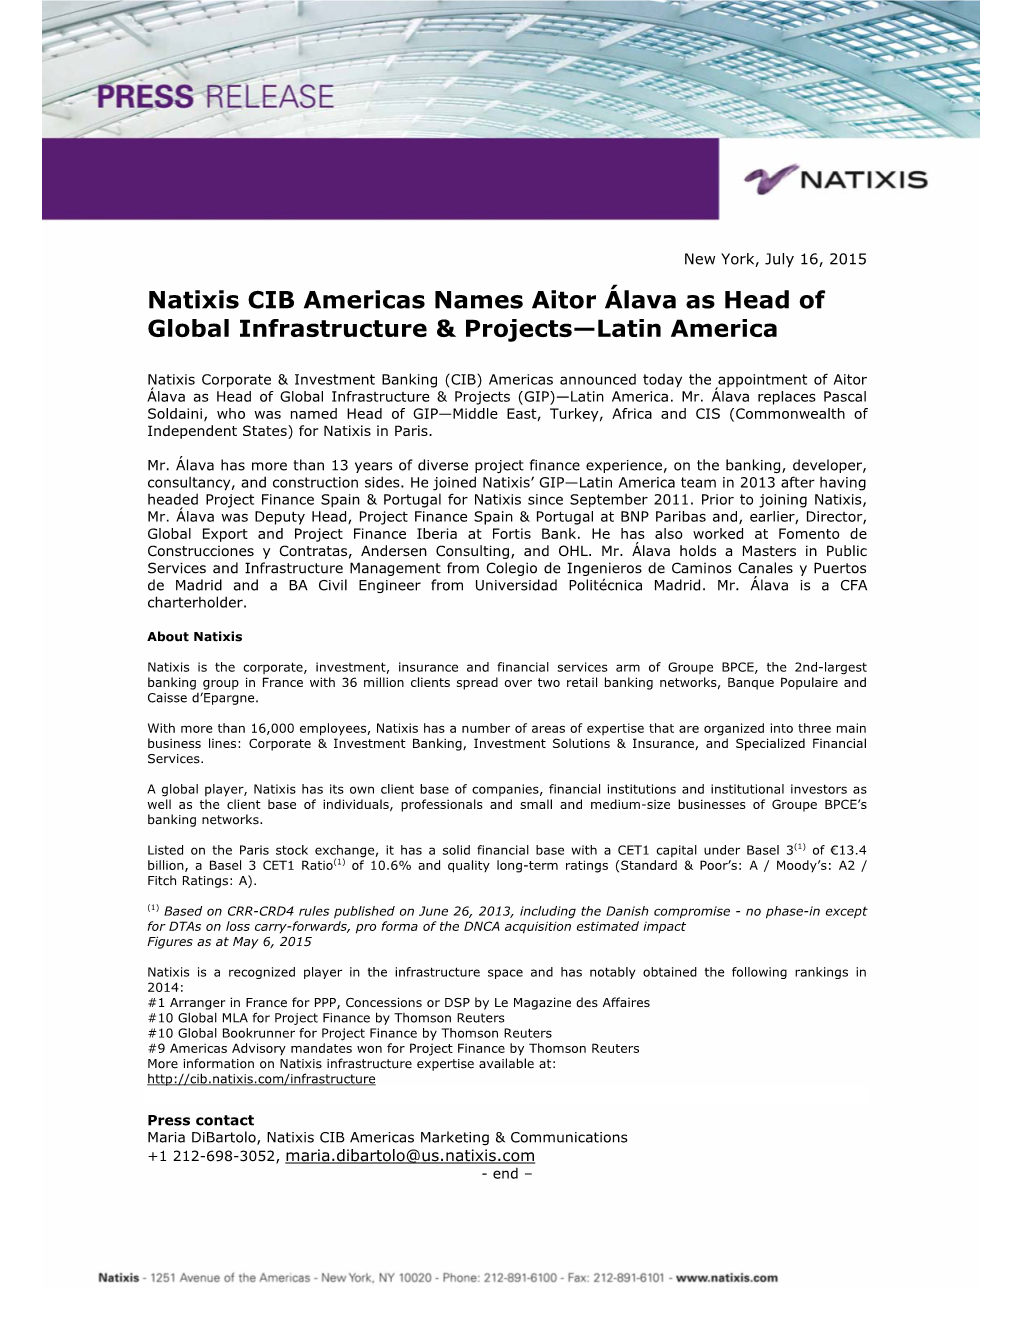 Natixis CIB Americas Names Aitor Álava As Head of Global Infrastructure & Projects—Latin America